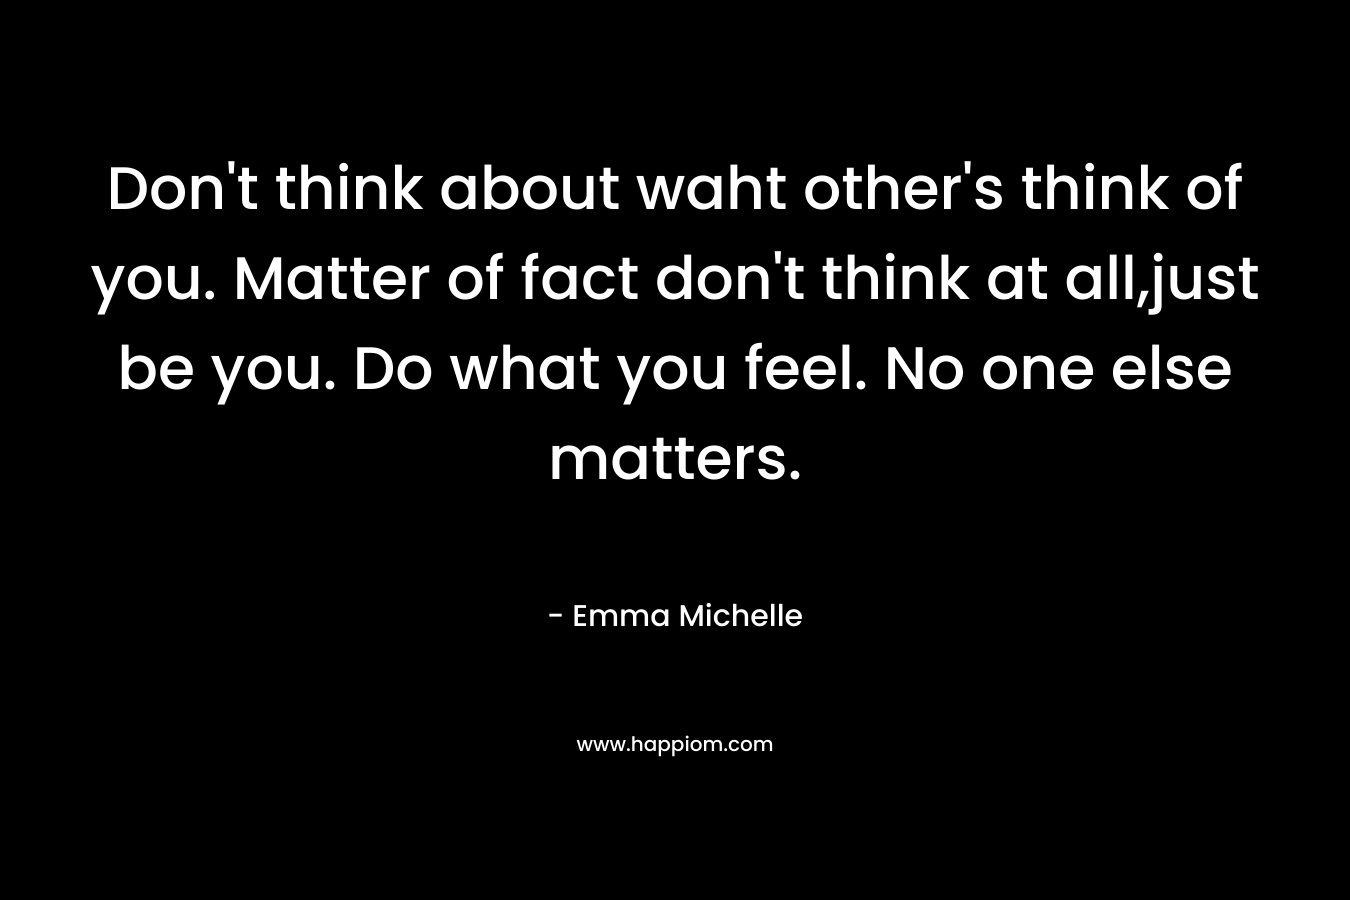 Don’t think about waht other’s think of you. Matter of fact don’t think at all,just be you. Do what you feel. No one else matters. – Emma Michelle